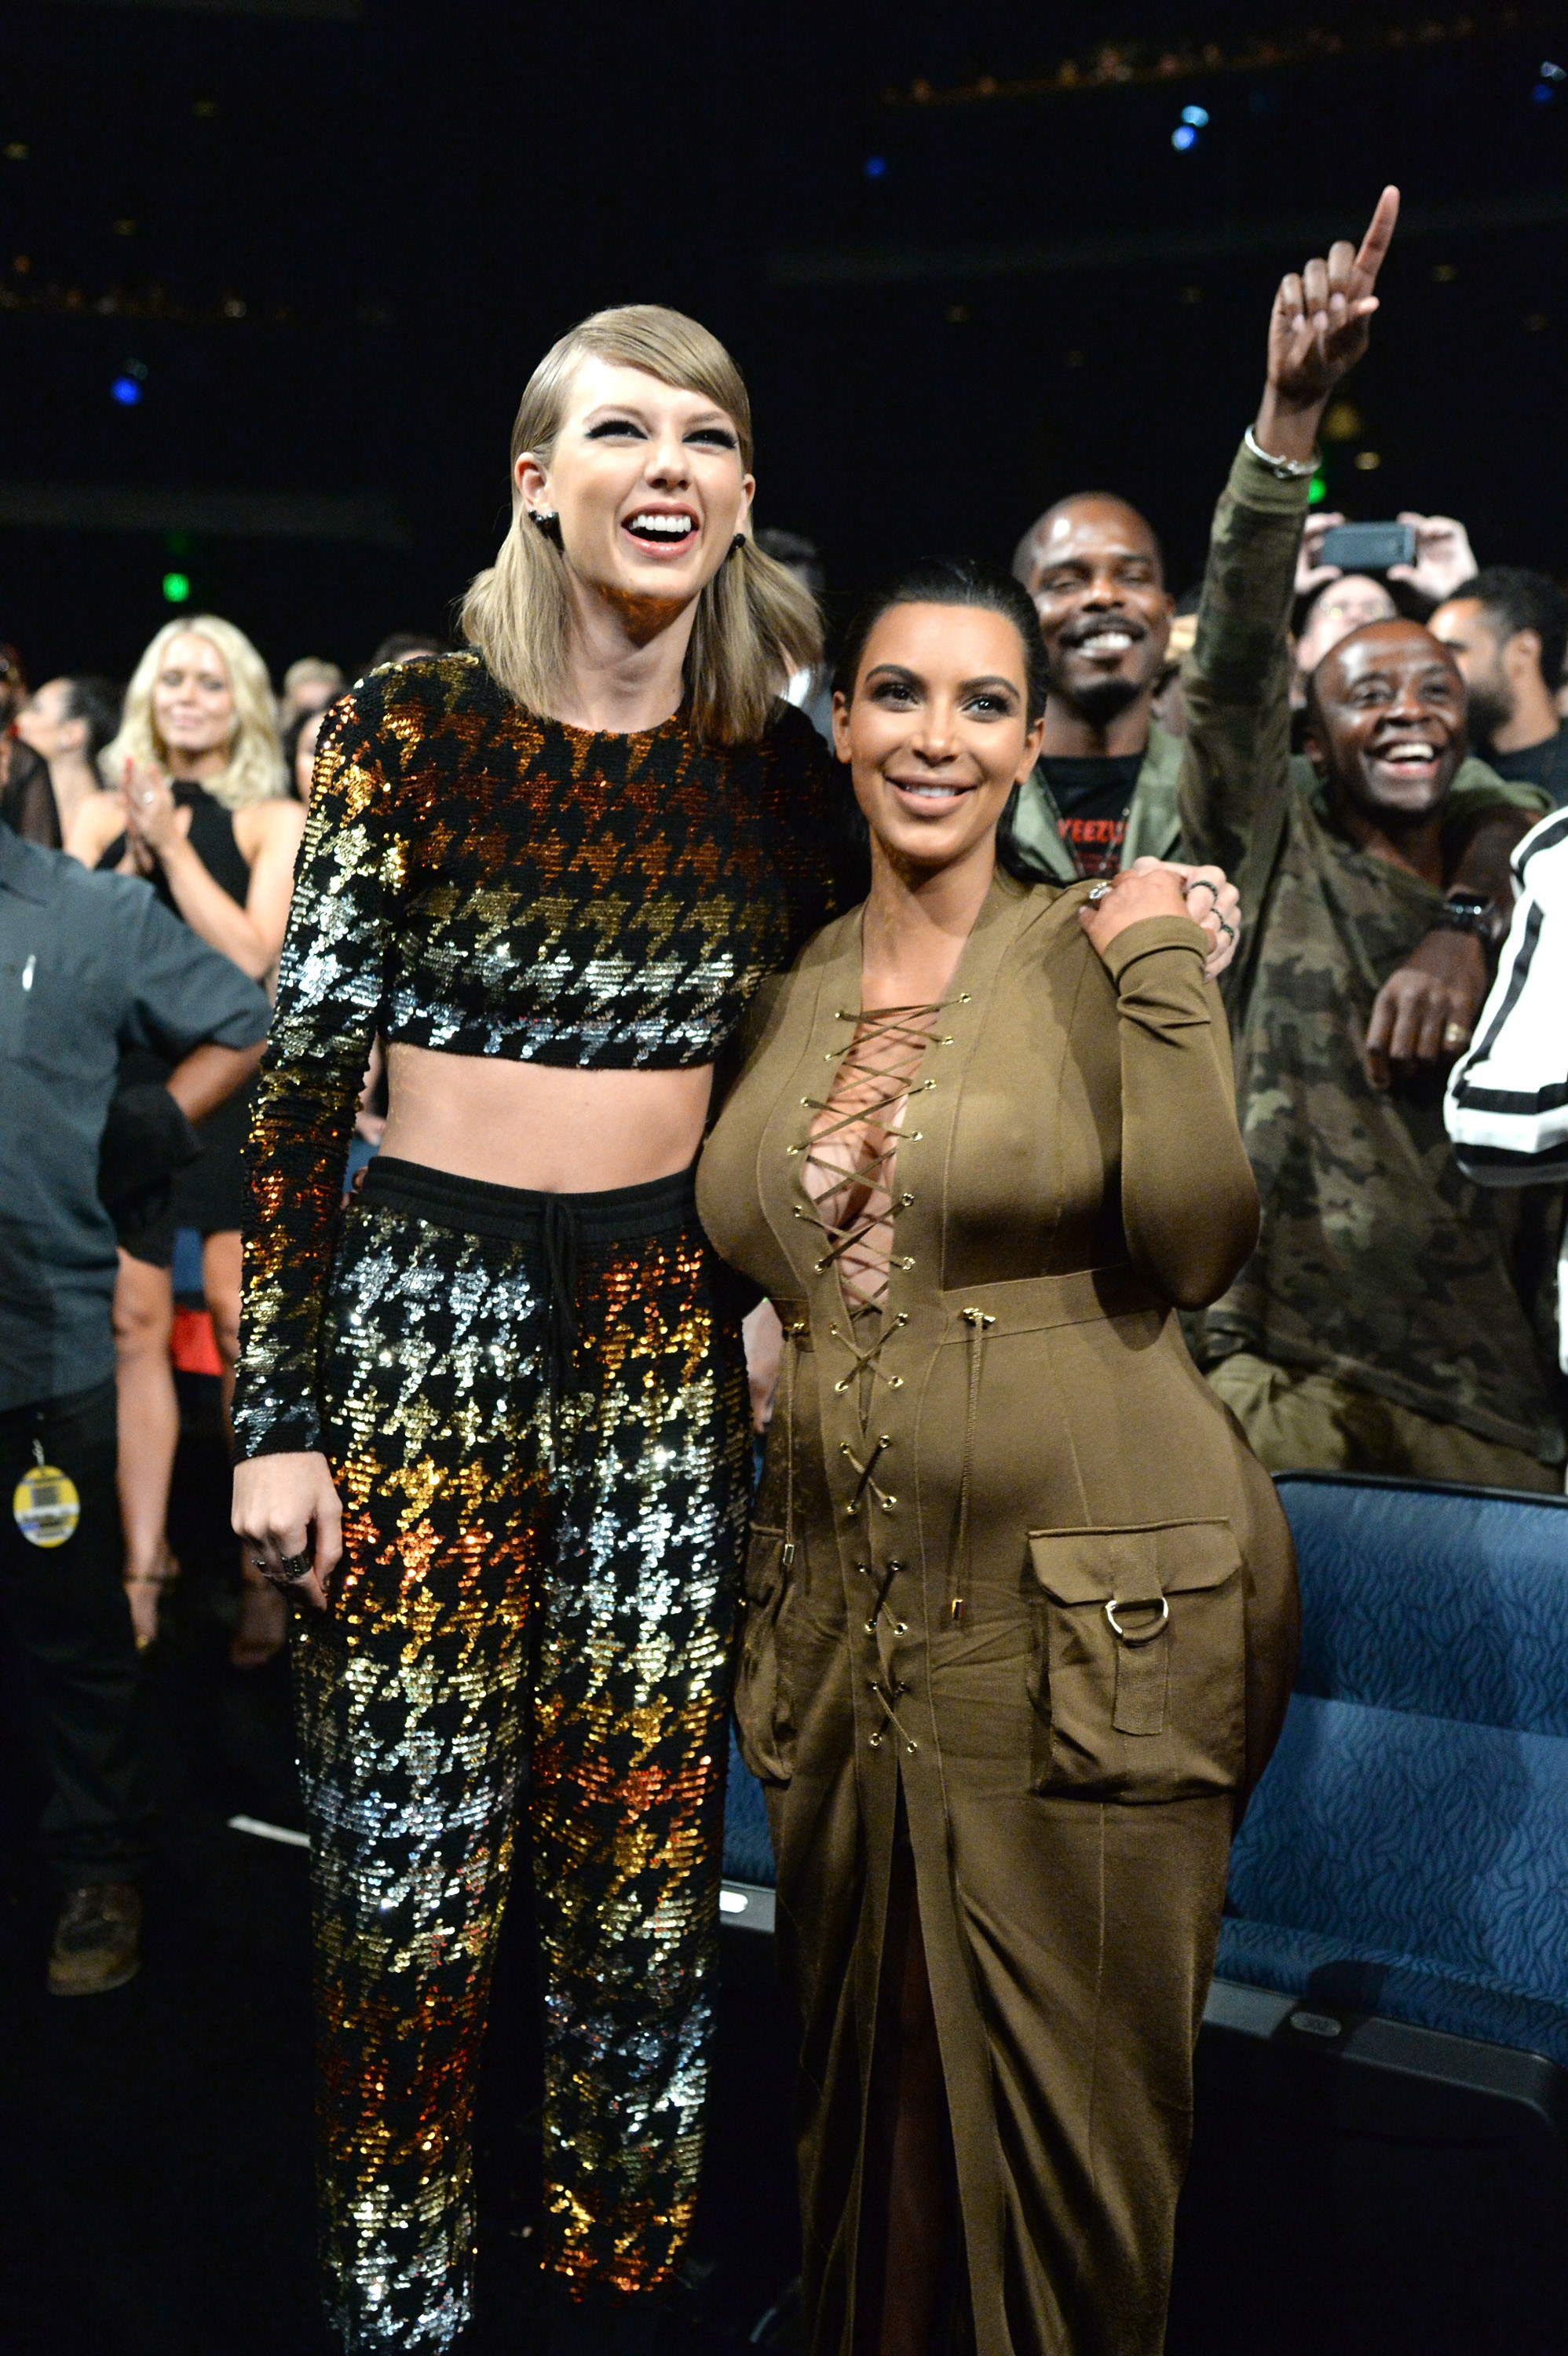 Taylor Swift in a sparkly jumpsuit and Kim Kardashian in a khaki dress stand front row at an awards show, smiling with their hands around each other